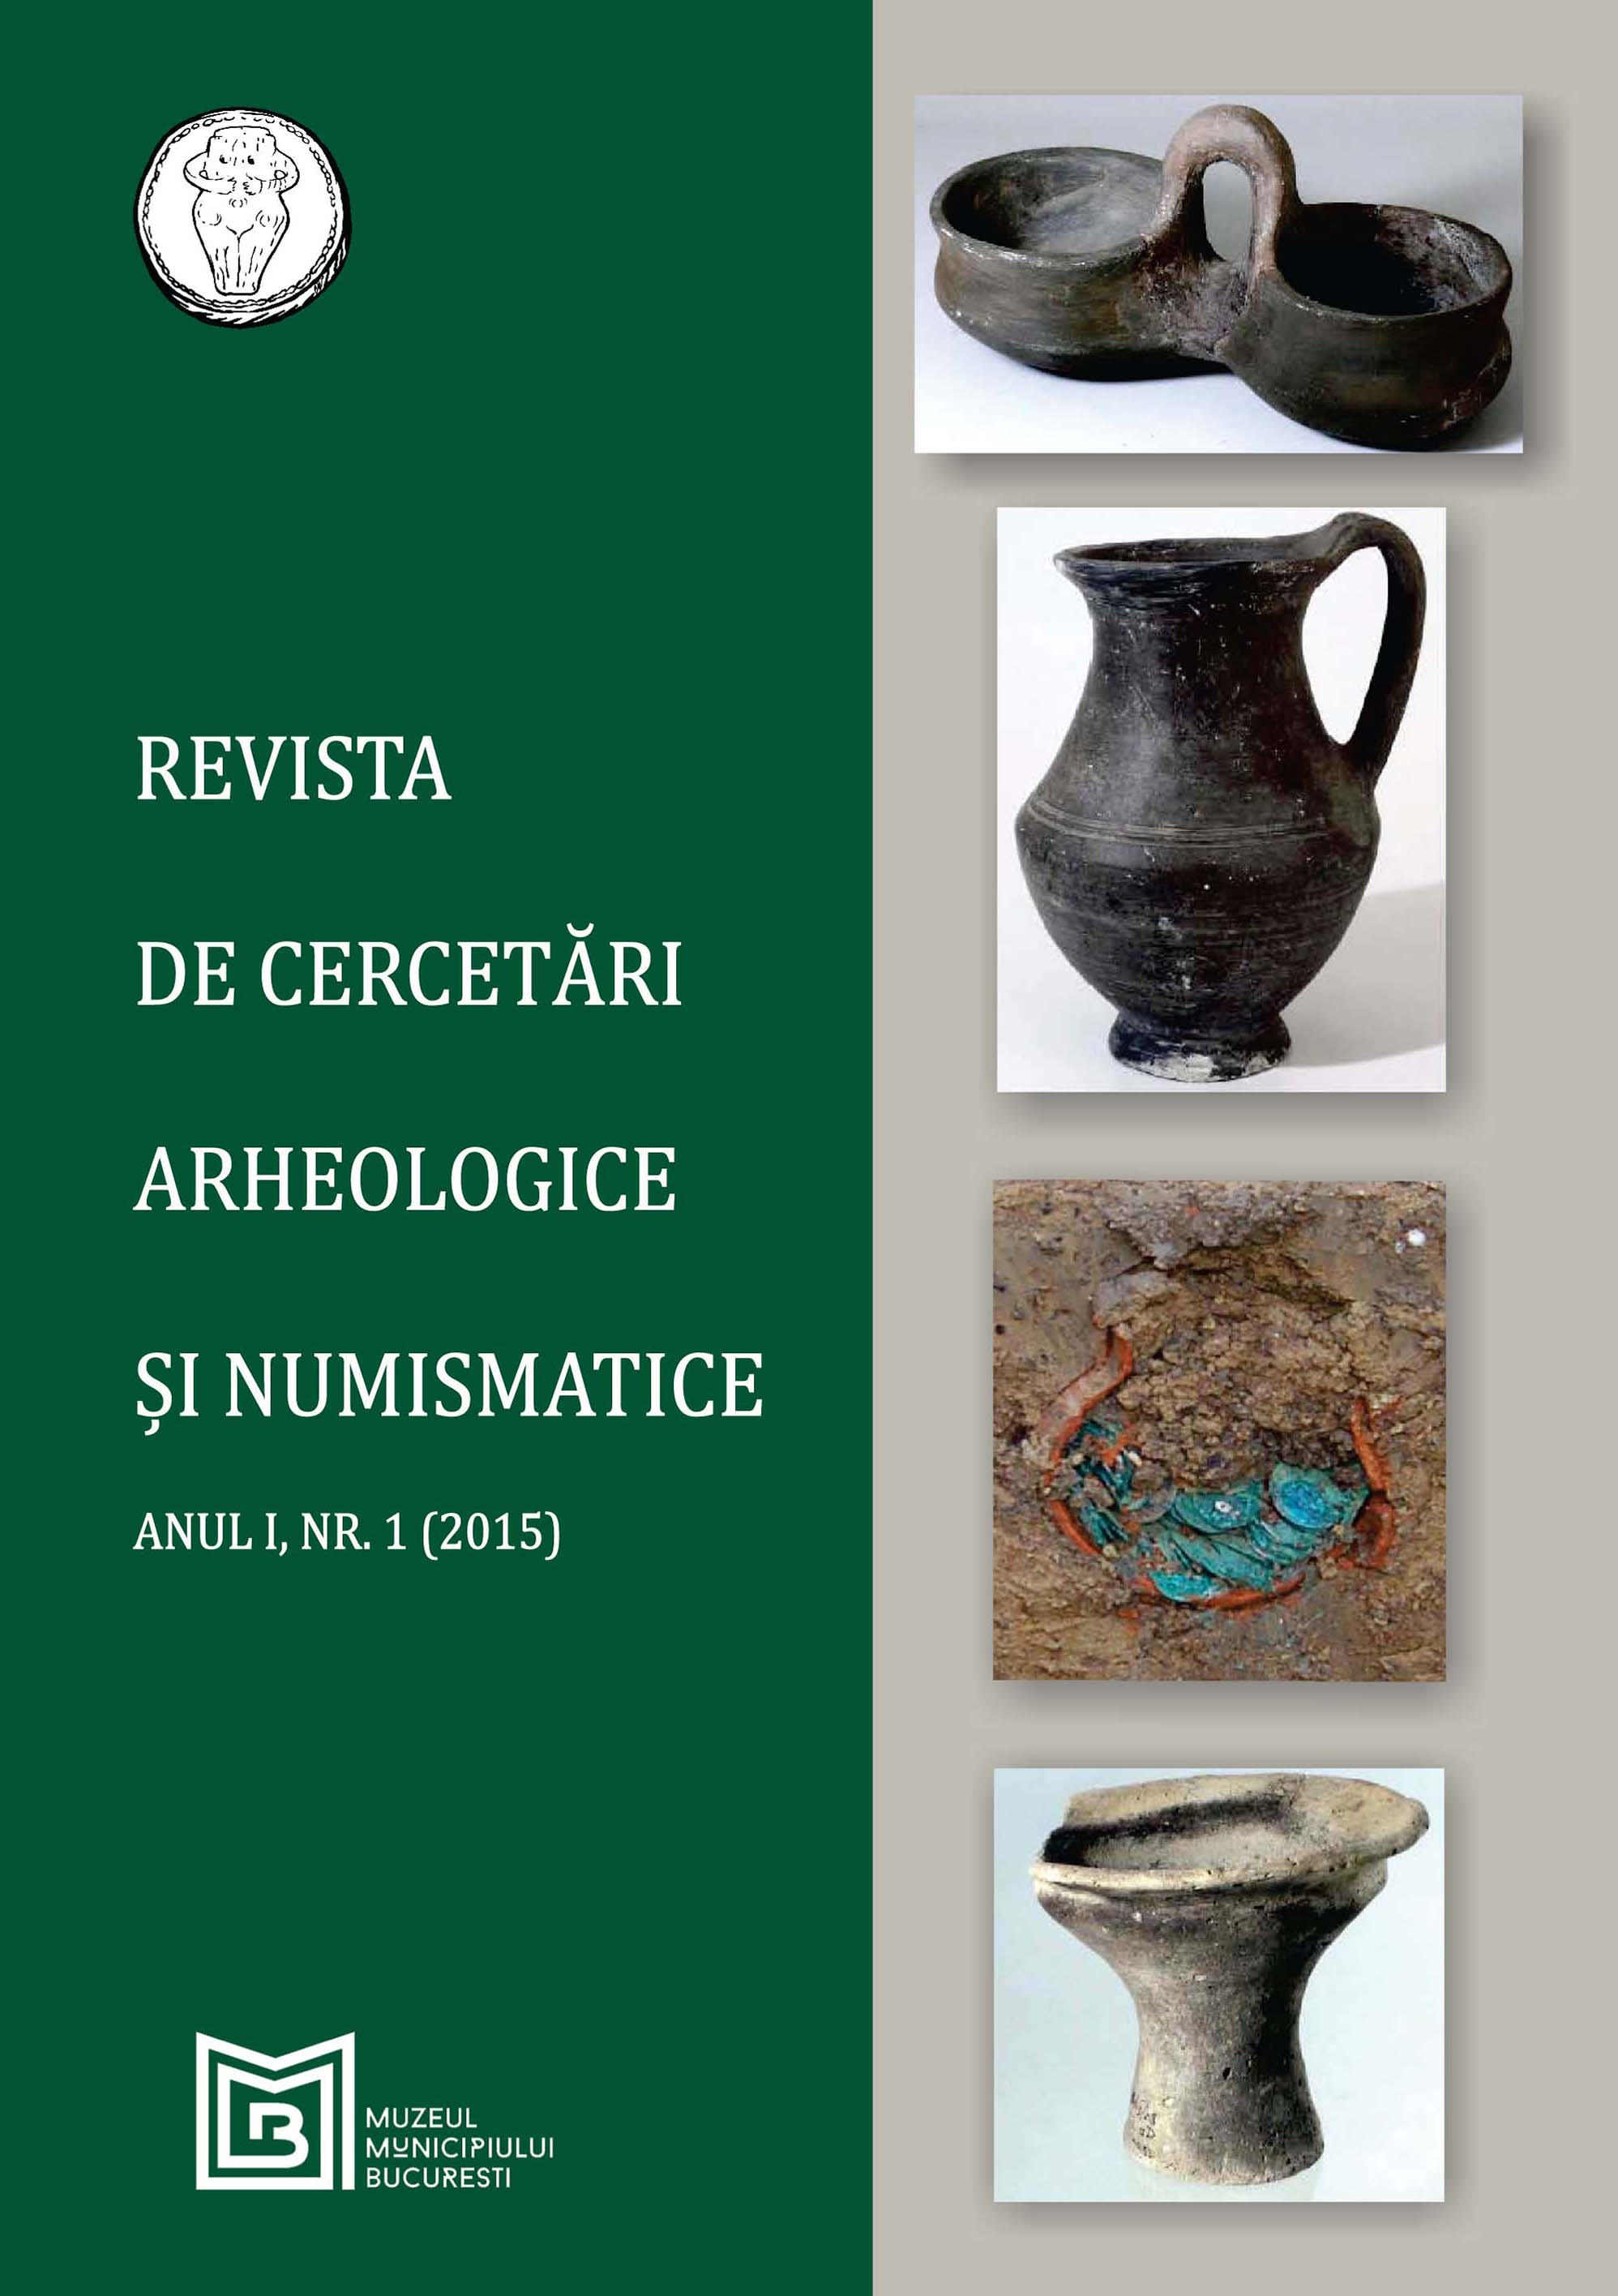 Old and new archaeological excavations in Radovanu, Călărași county. Cover Image